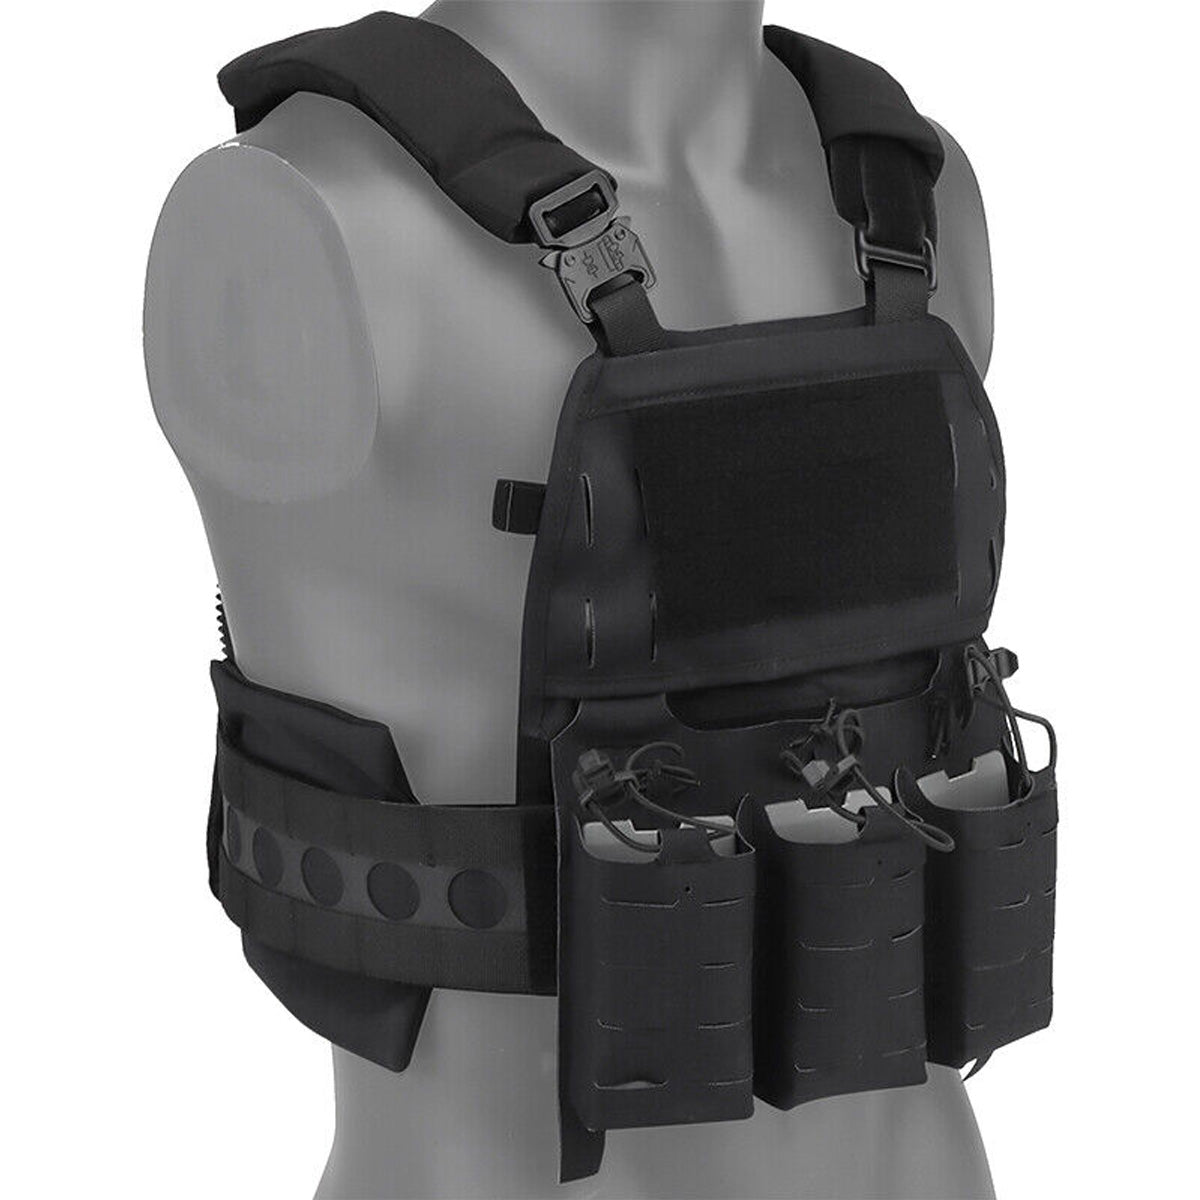 WOSPORT V5 TACTICAL VEST FOR AIRSOFT FROM WOSPORT